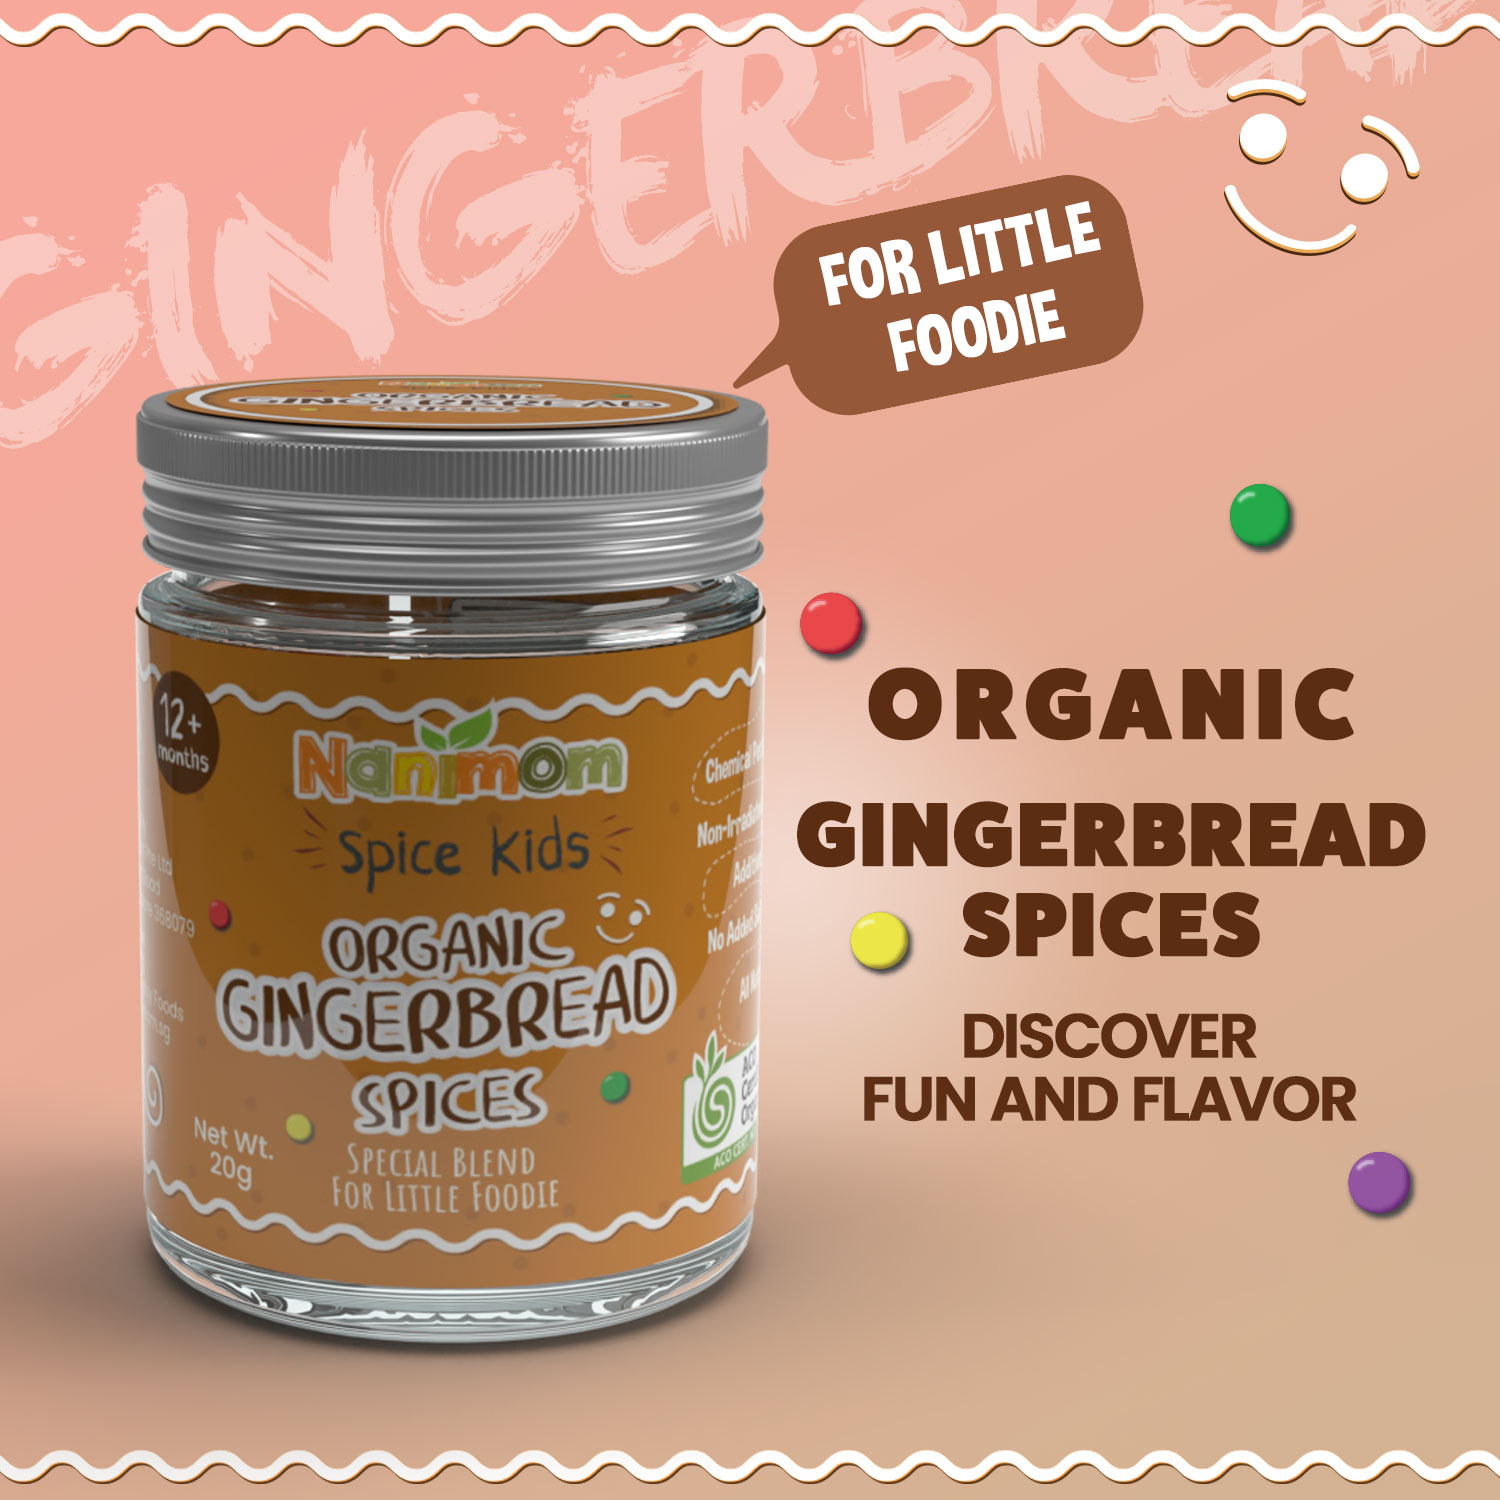 Spice Kids Organic Gingerbread Spices